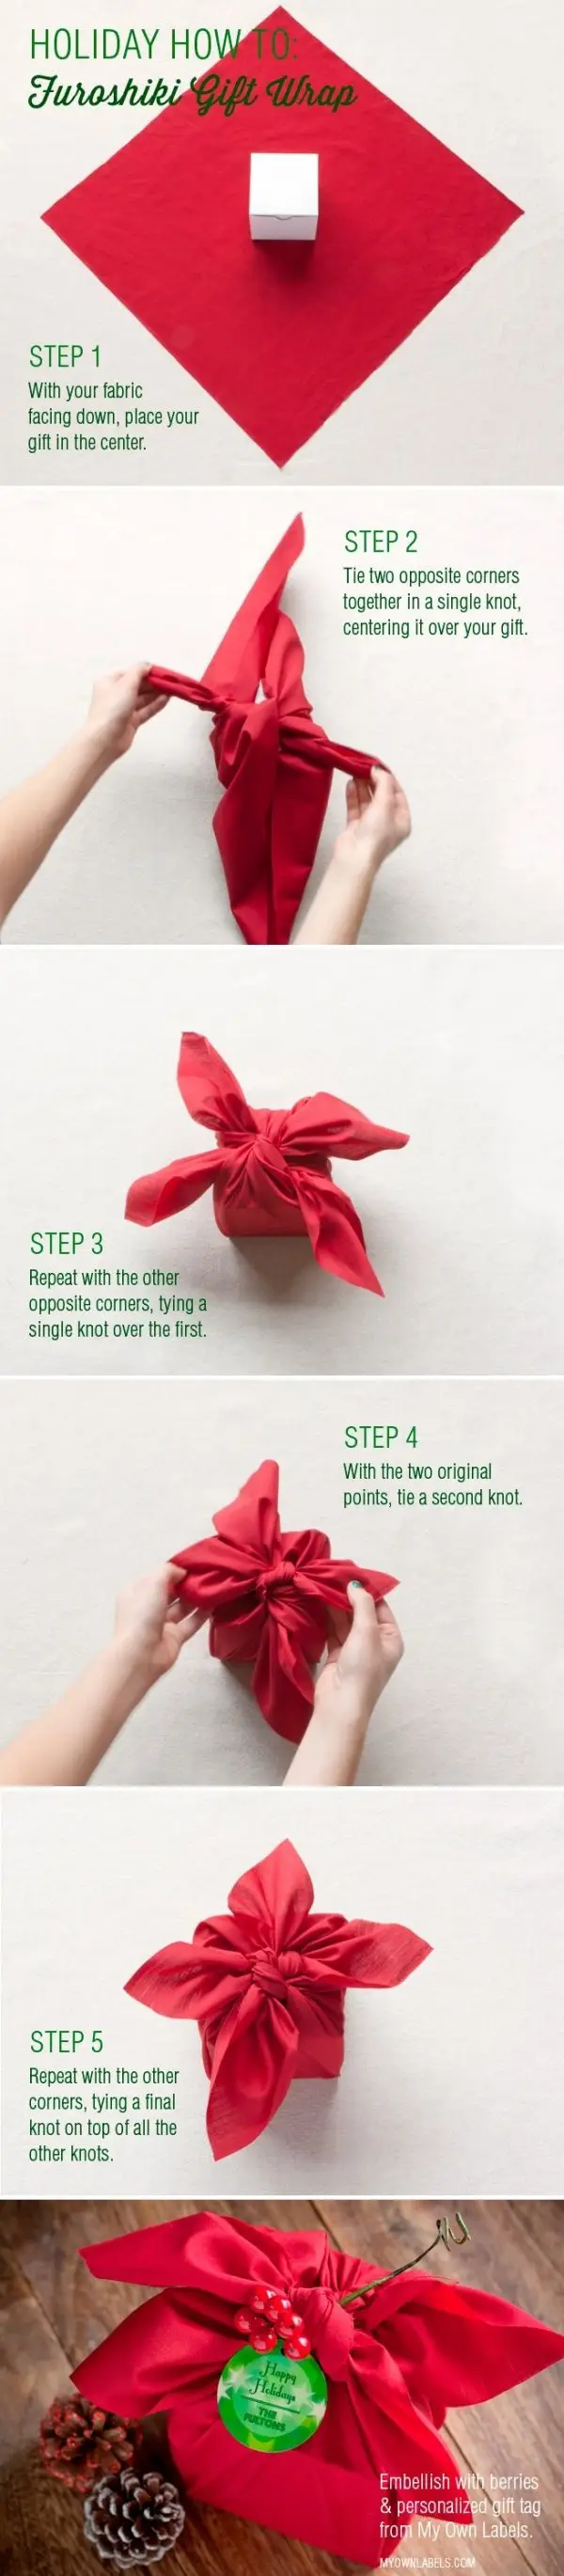 20 Fabulous Gift Wrapping Tutorials for the Holidays ...